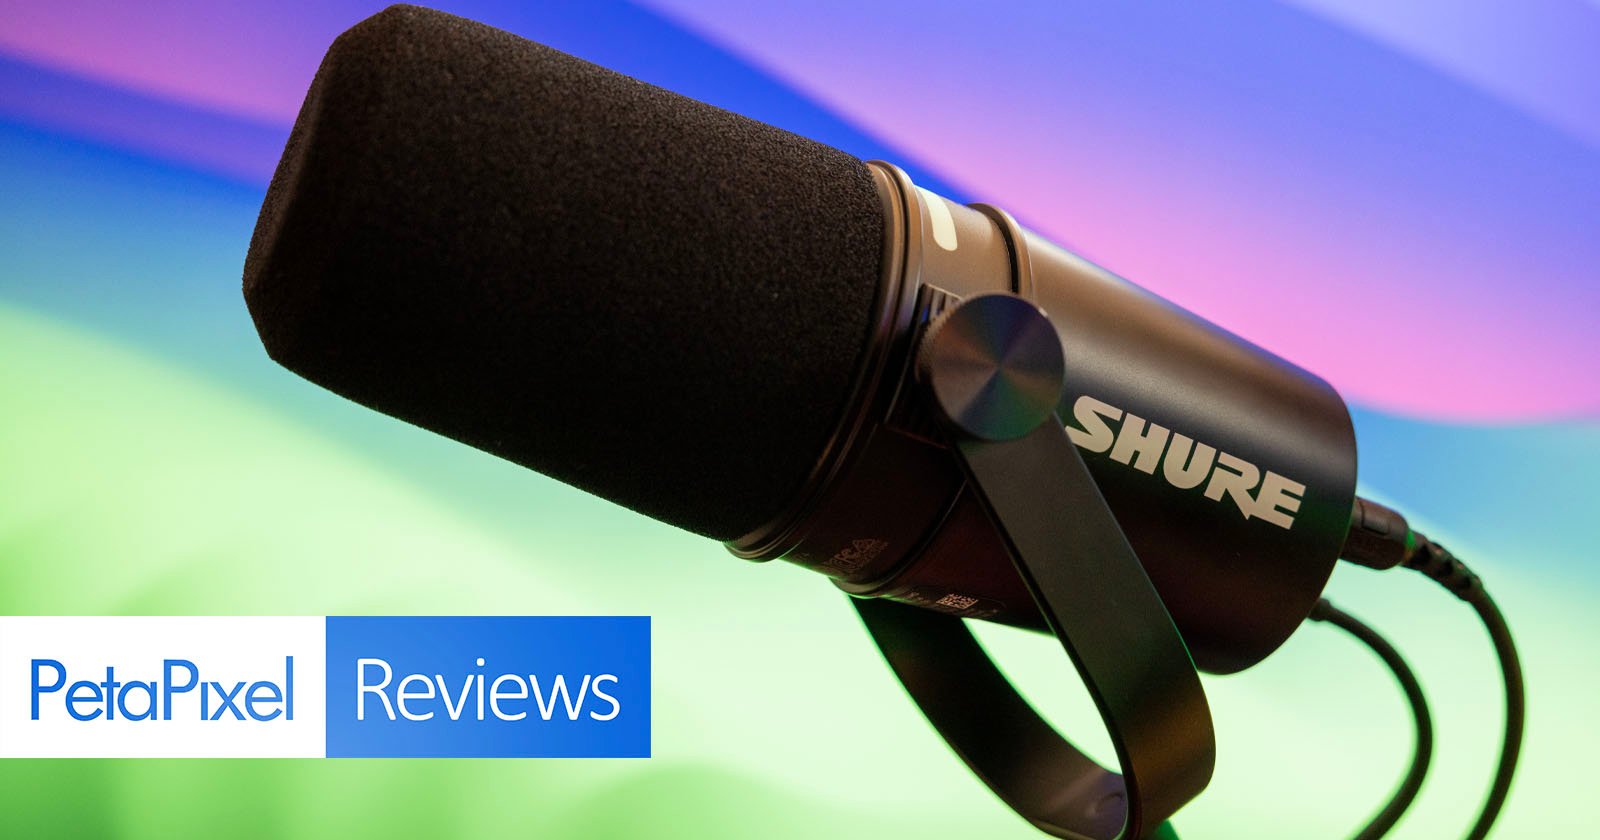 A close-up image of a black shure microphone with its brand logo visible, positioned against a colorful blurred background, with the text petapixel reviews overlaying the bottom corner.